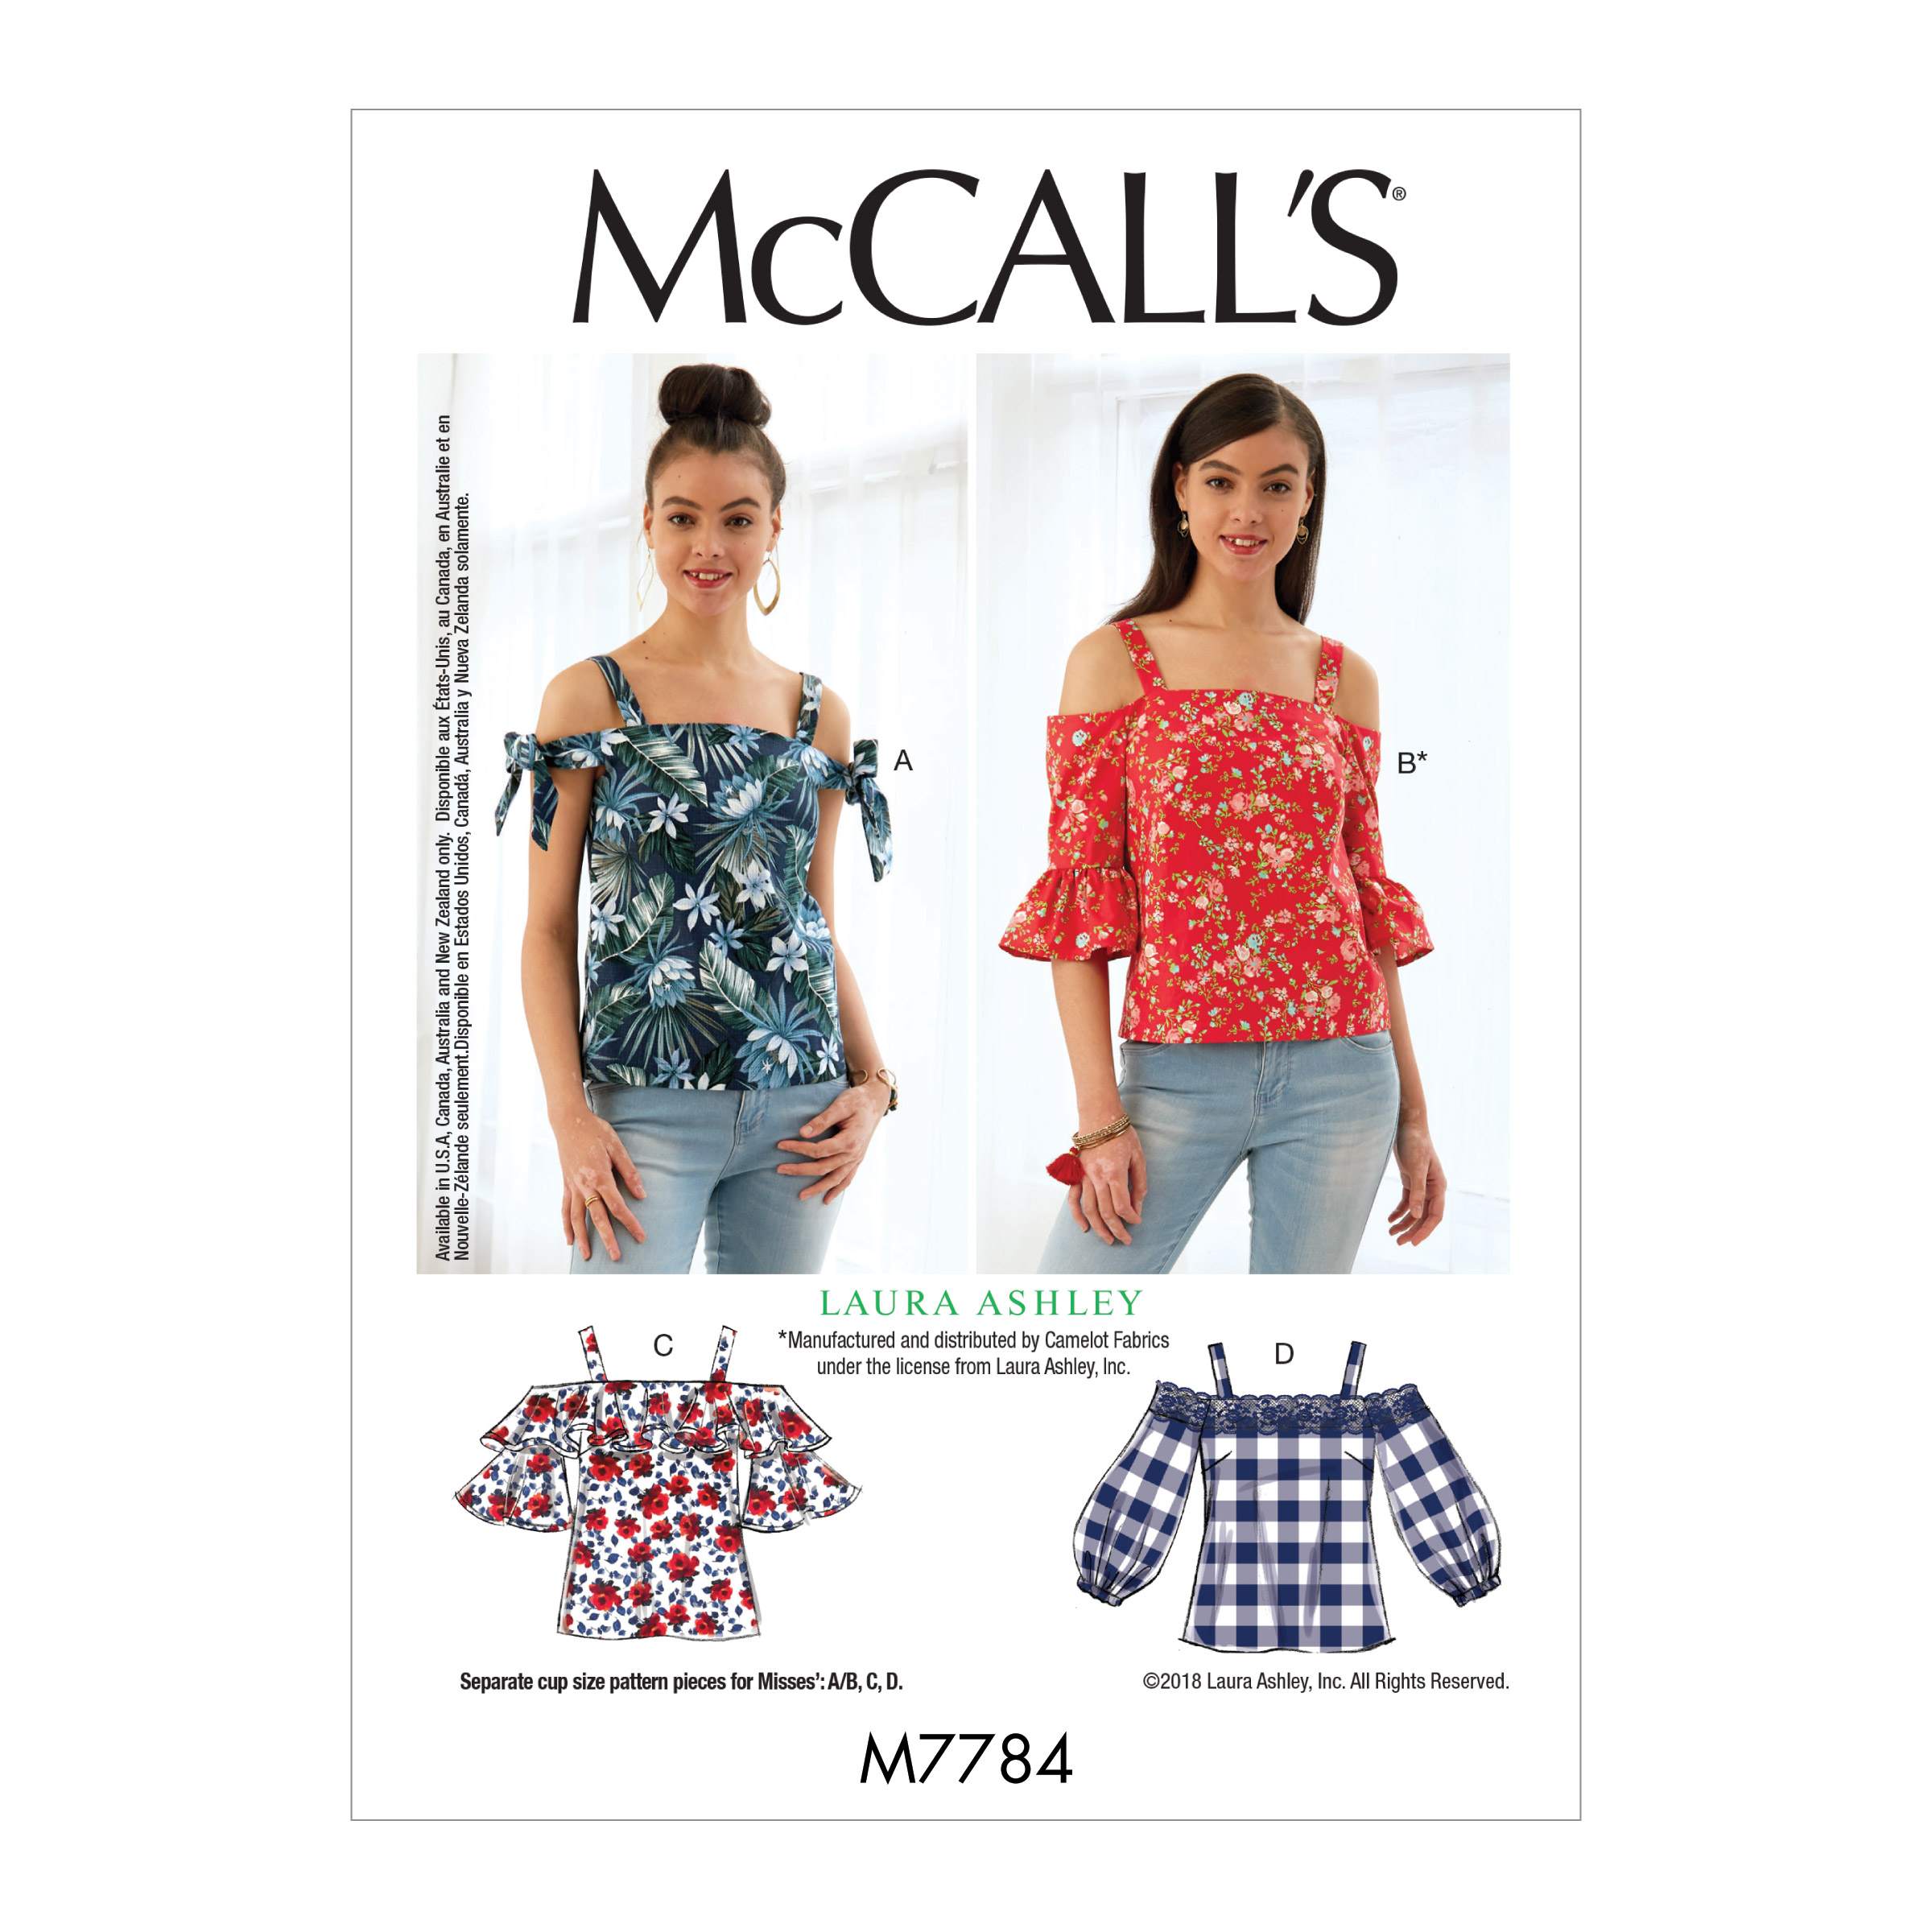 McCalls Sewing Pattern M8113 Misses' & Women's Tops With Cup Sizes Pattern  Pieces. #PortiaMcCalls - Sewdirect